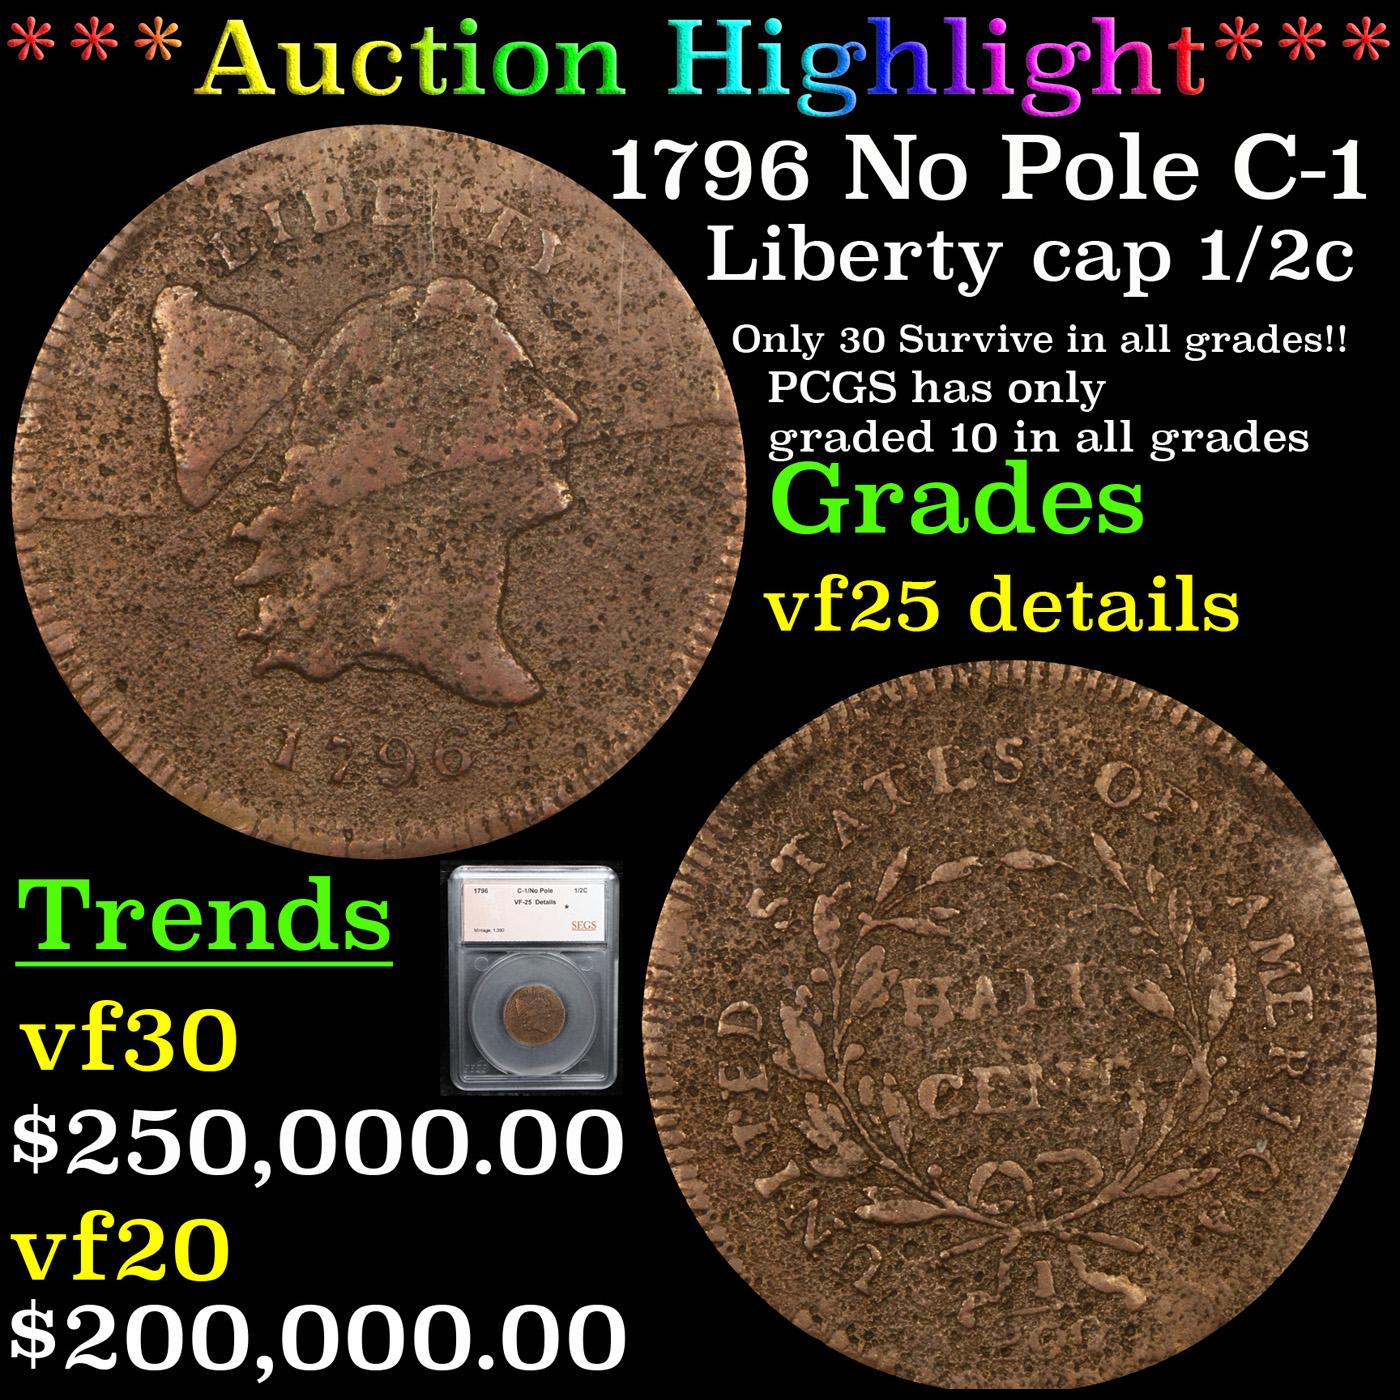 ***Auction Highlight*** 1796 No Pole C-1 Liberty Cap half cent 1/2c Graded vf25 details By SEGS (fc)